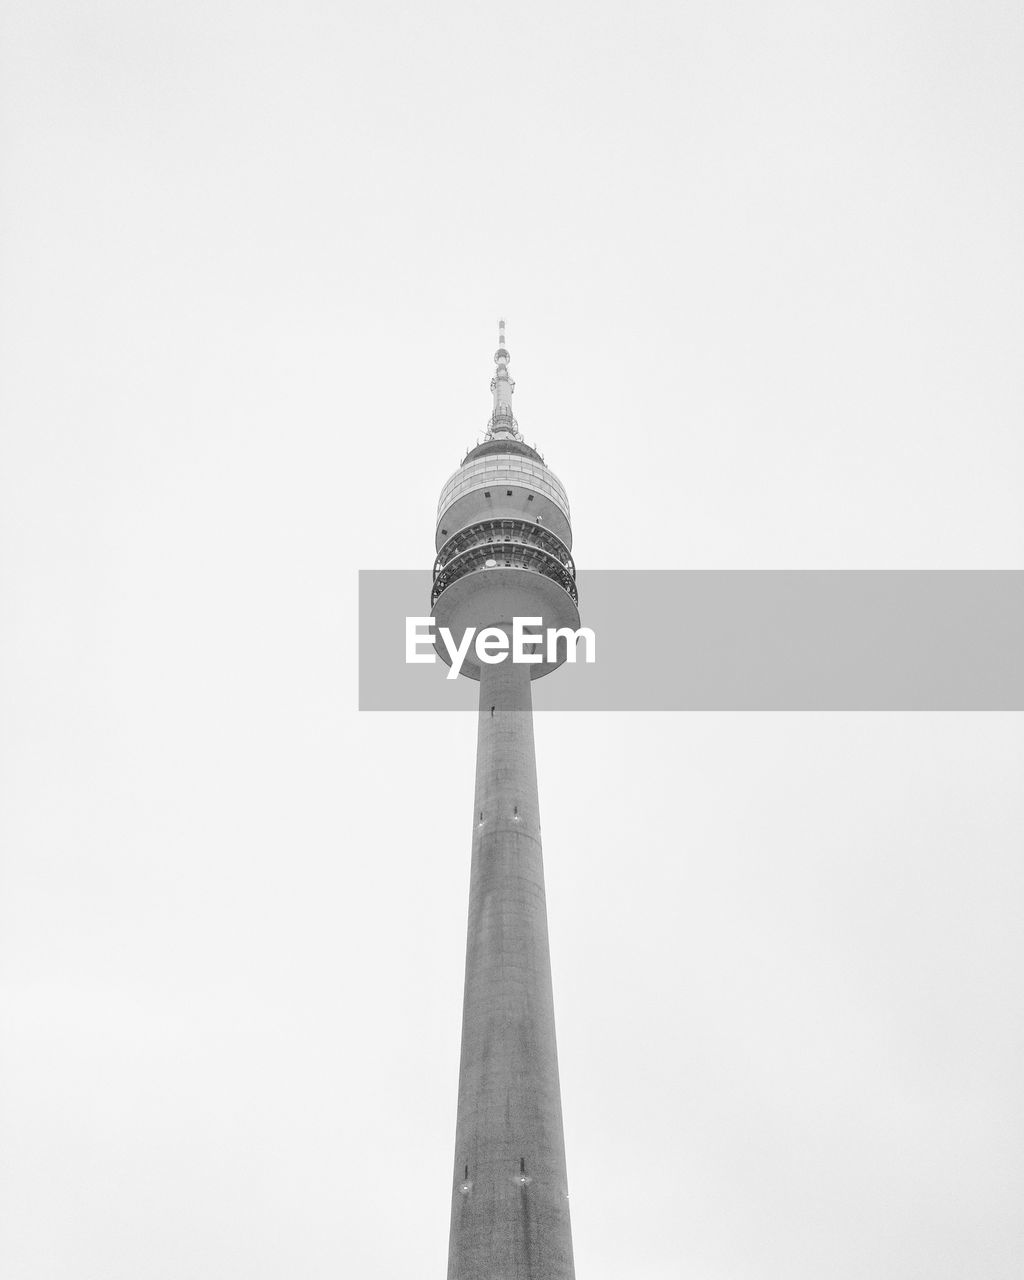 LOW ANGLE VIEW OF COMMUNICATIONS TOWER IN CITY AGAINST CLEAR SKY